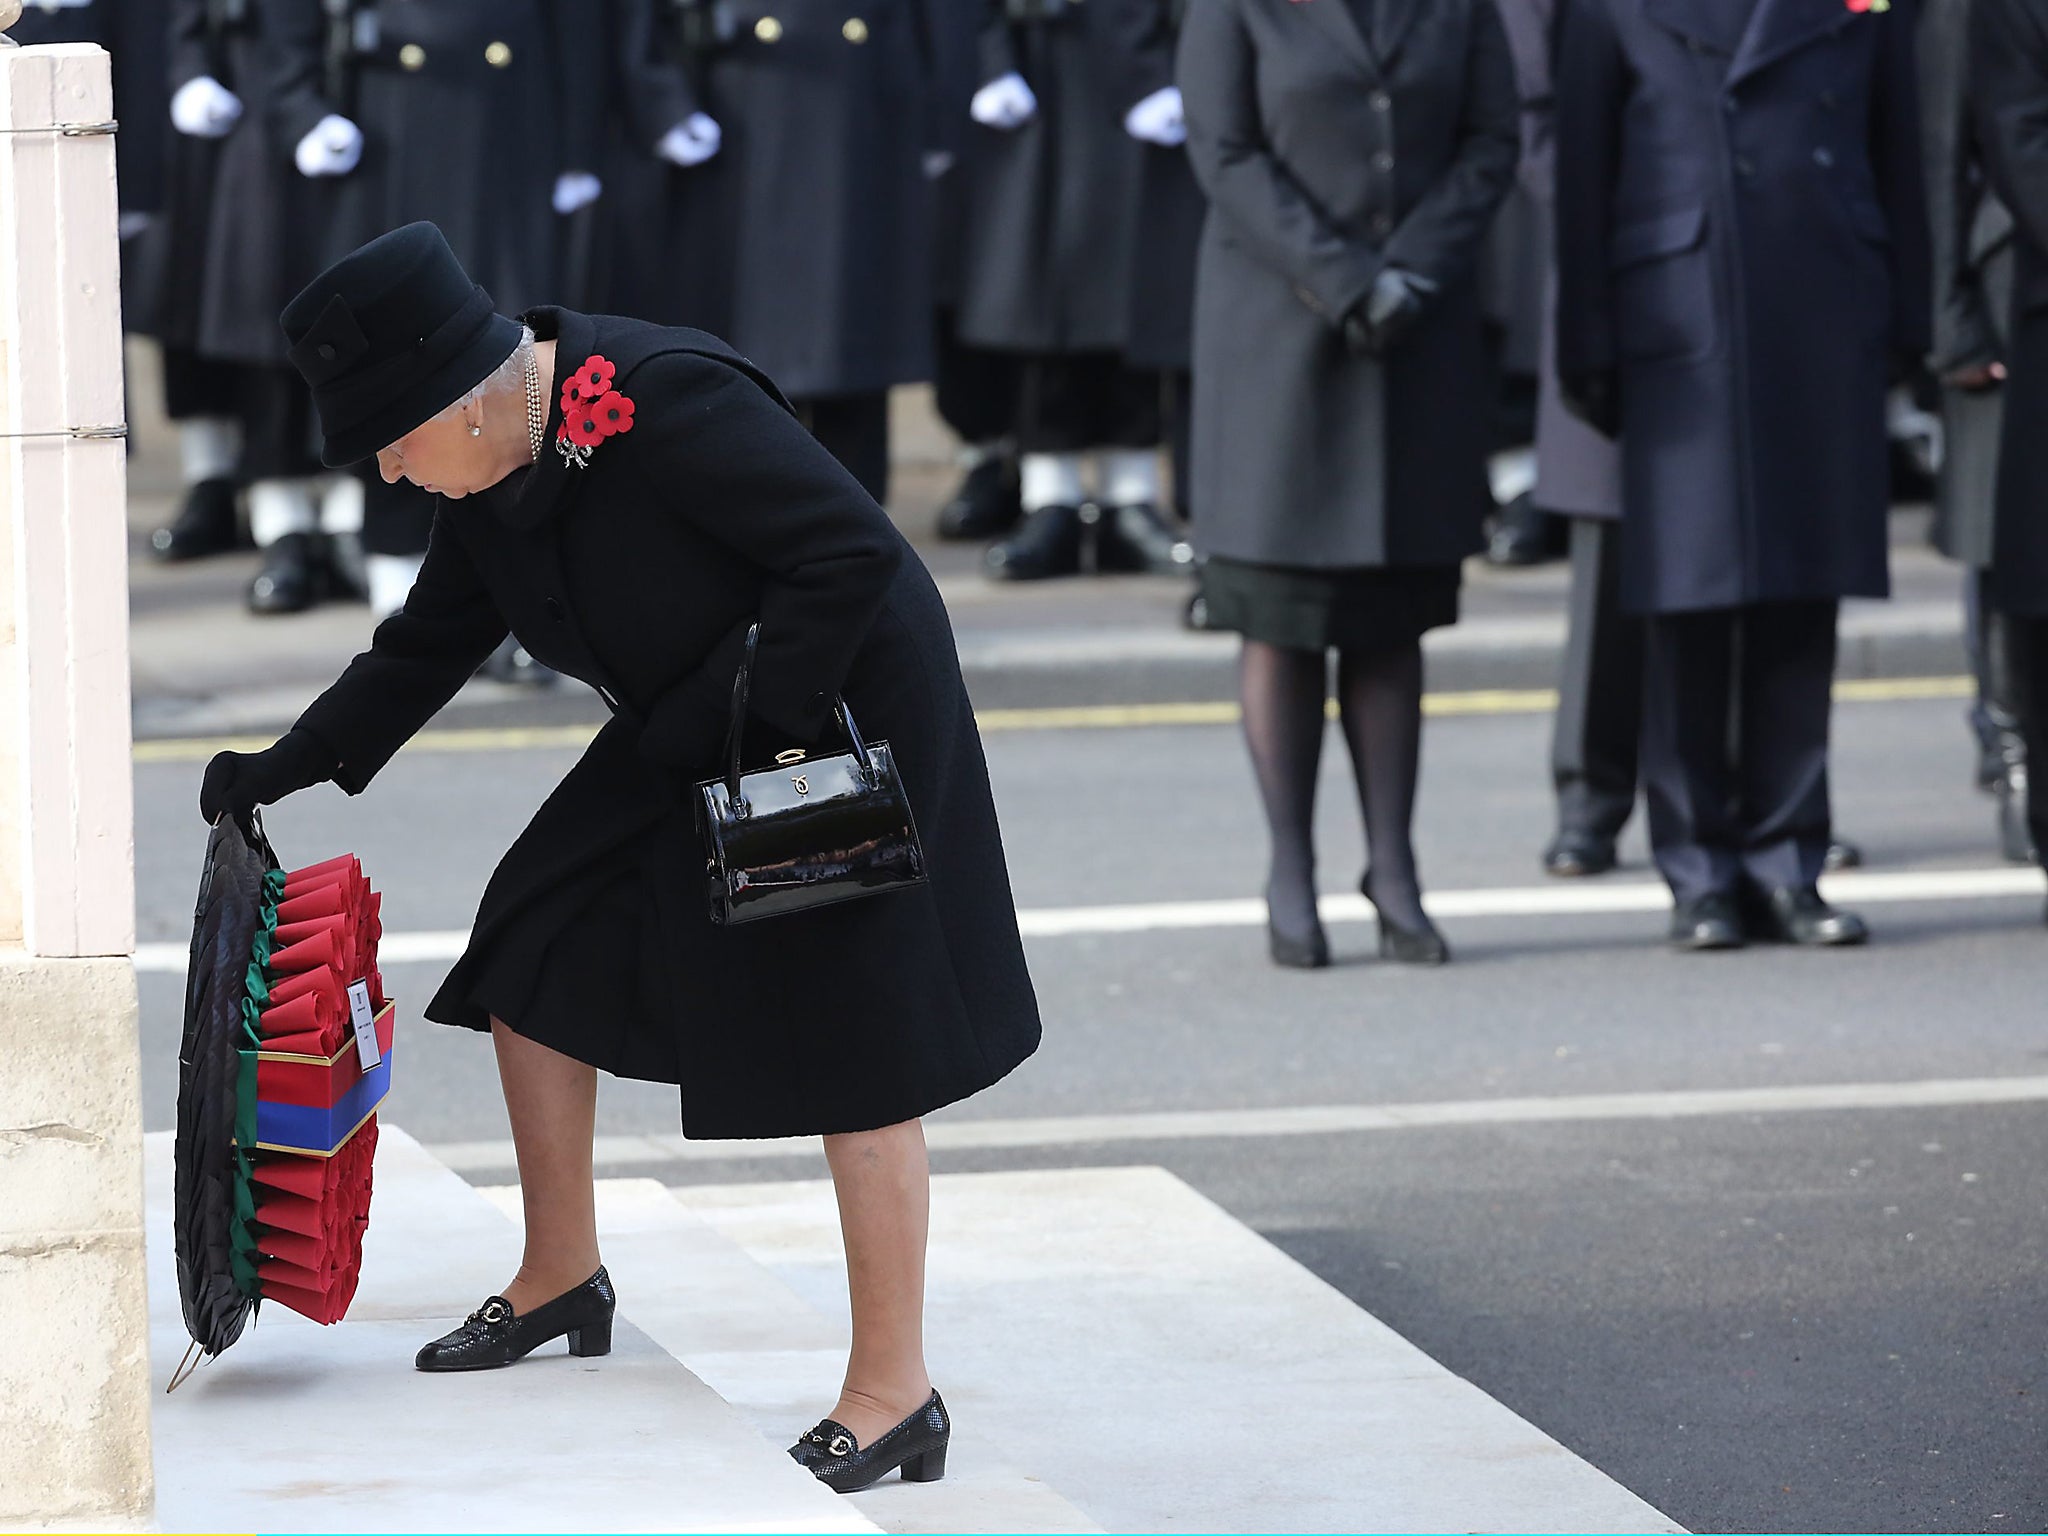 Queen Elizabeth II lays a wreath during the 2016 Remembrance Sunday Service at the Cenotaph on Whitehall in London